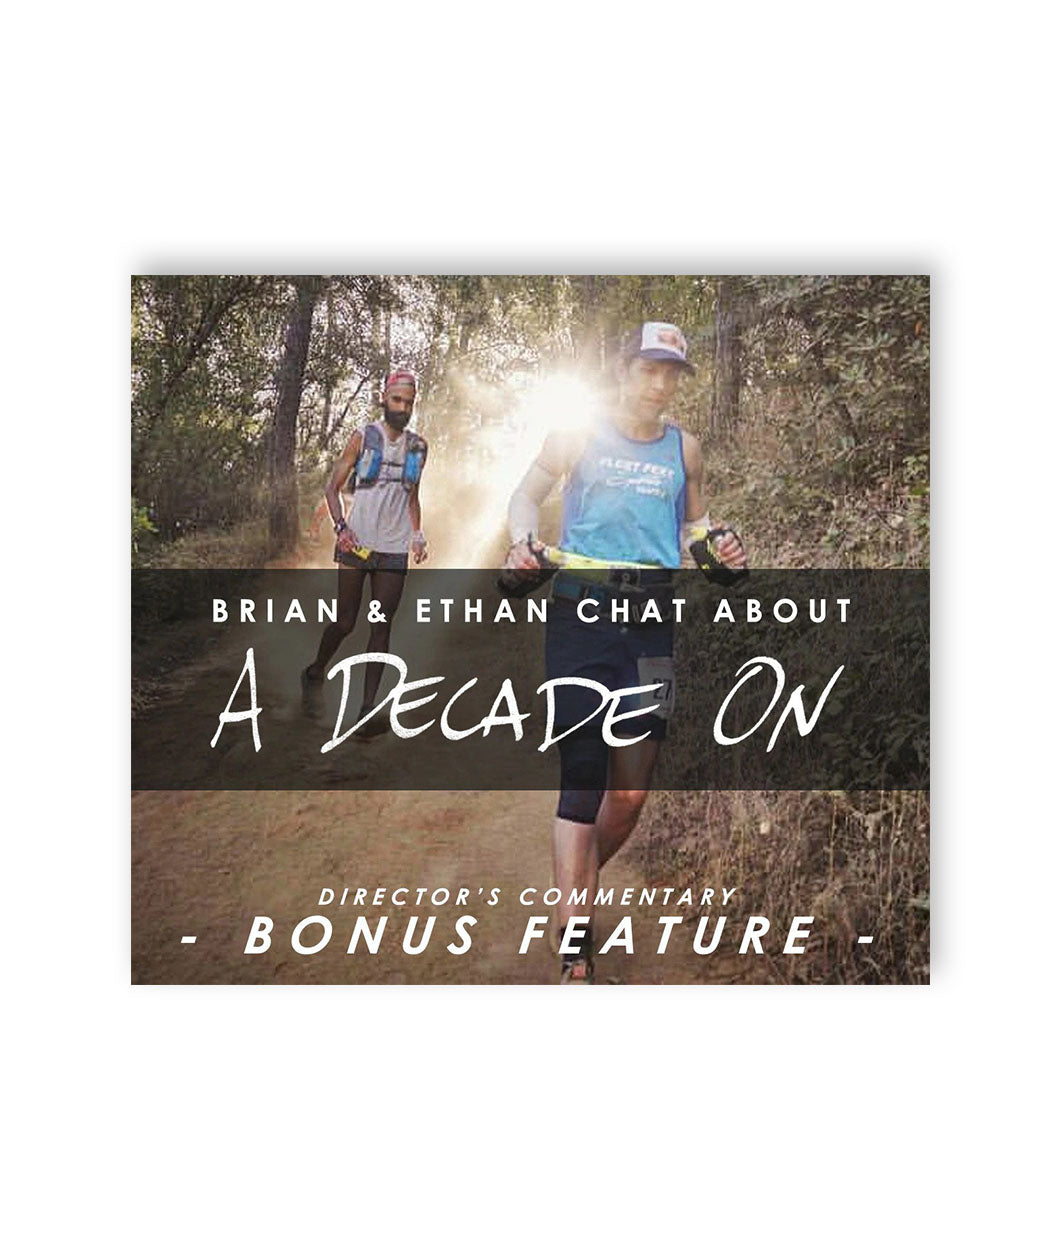 A sqaure photo of two people running through a forest. “Brian & Ethan Chat About” is in white sans serif font. “A decade on” is in white handwritten font. Both are on a gray bar with light opacity. “Director’s Commentary Bonus Feature” is at the bottom in white sans serif font - from the Ginger Runner